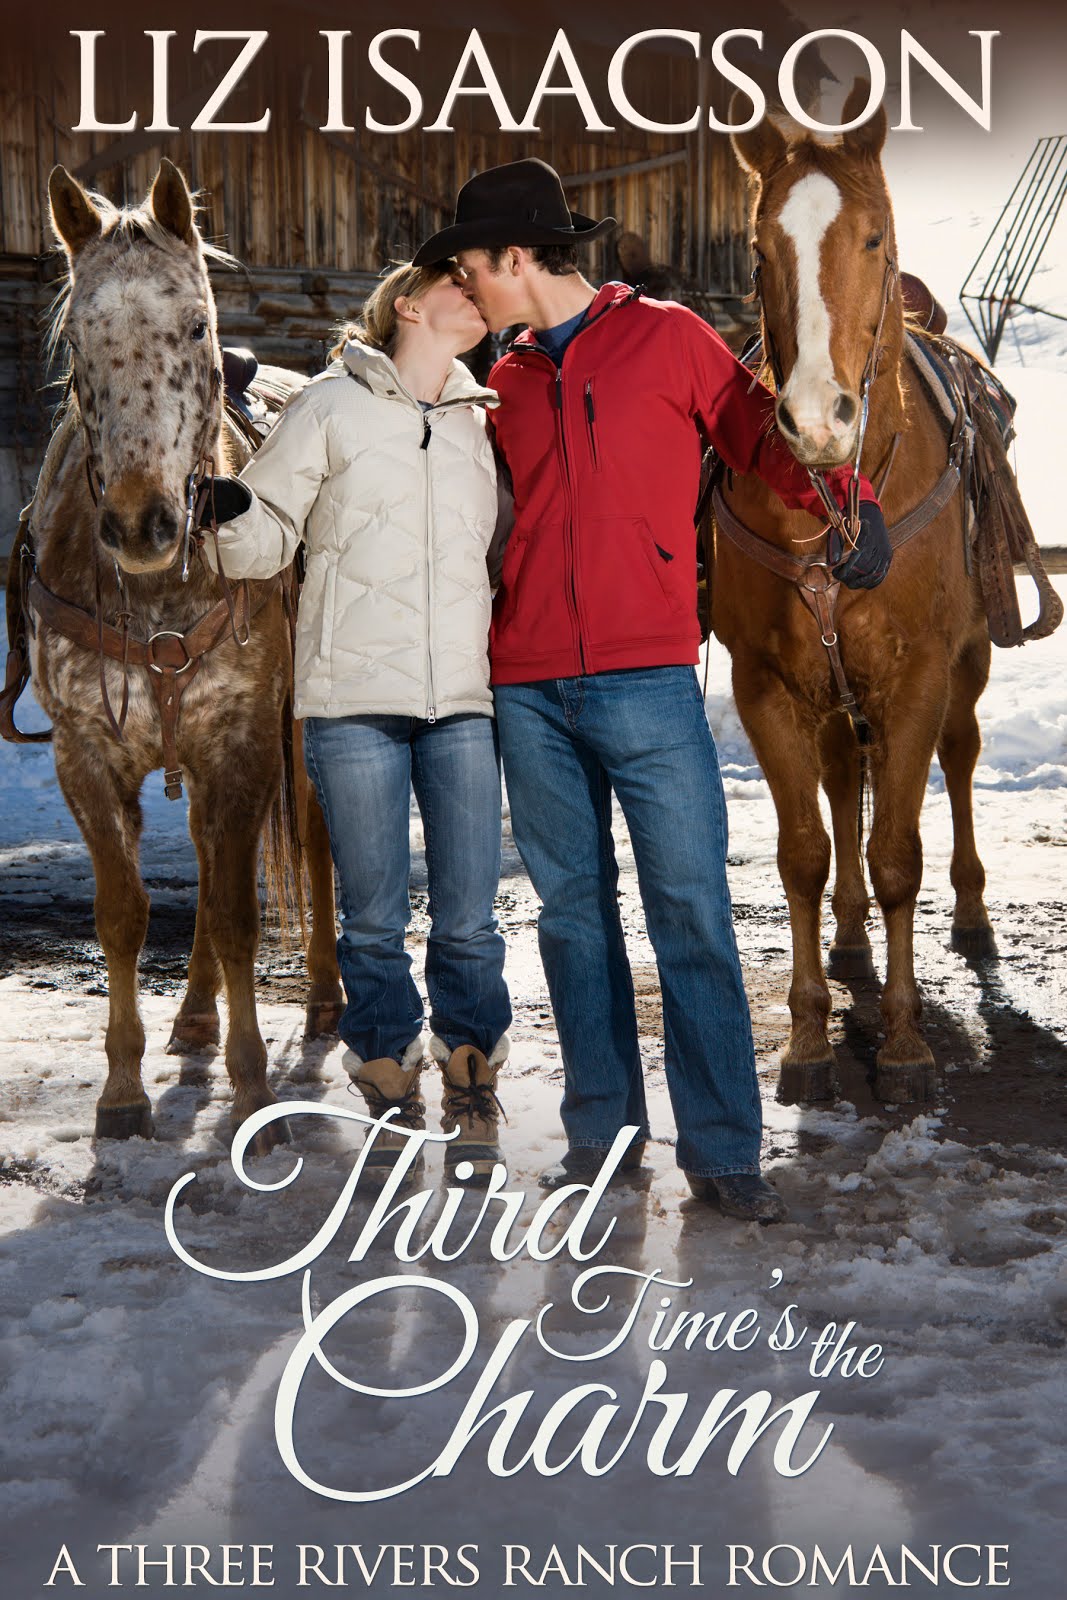 Get the whole Three Rivers Ranch Romance series!